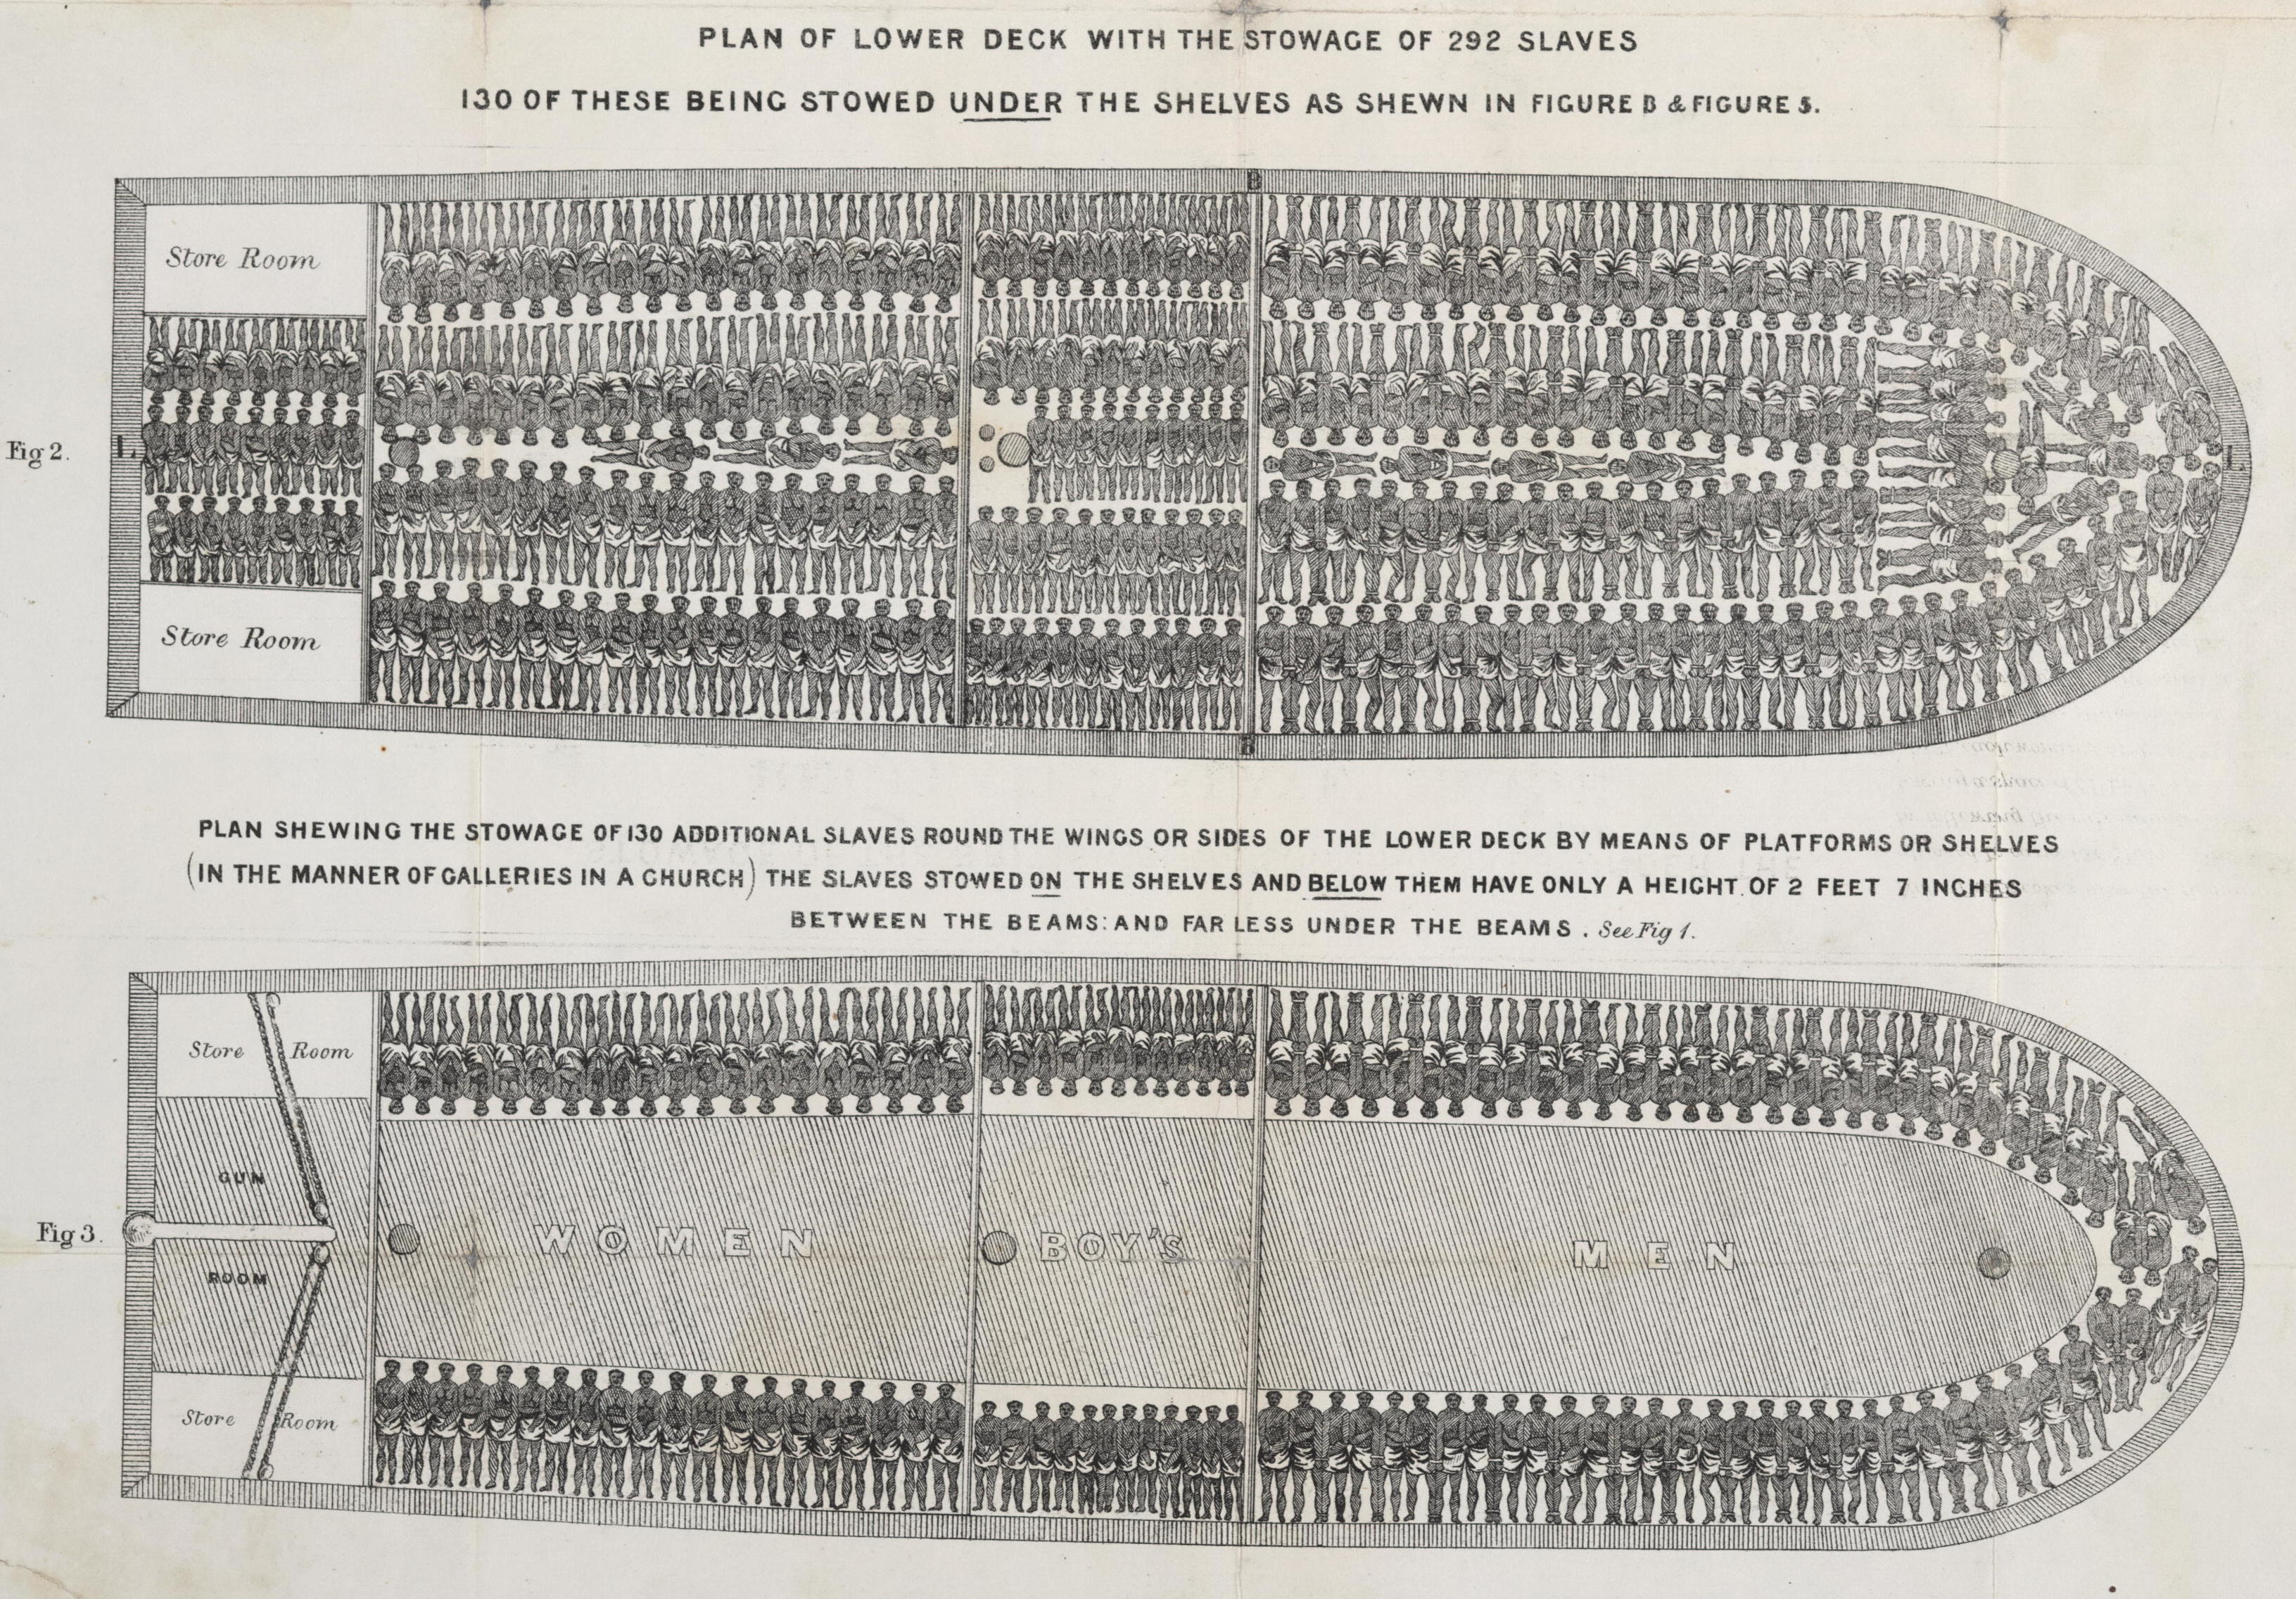 transportation of the slaves during the Trans-Atlantic slave trade